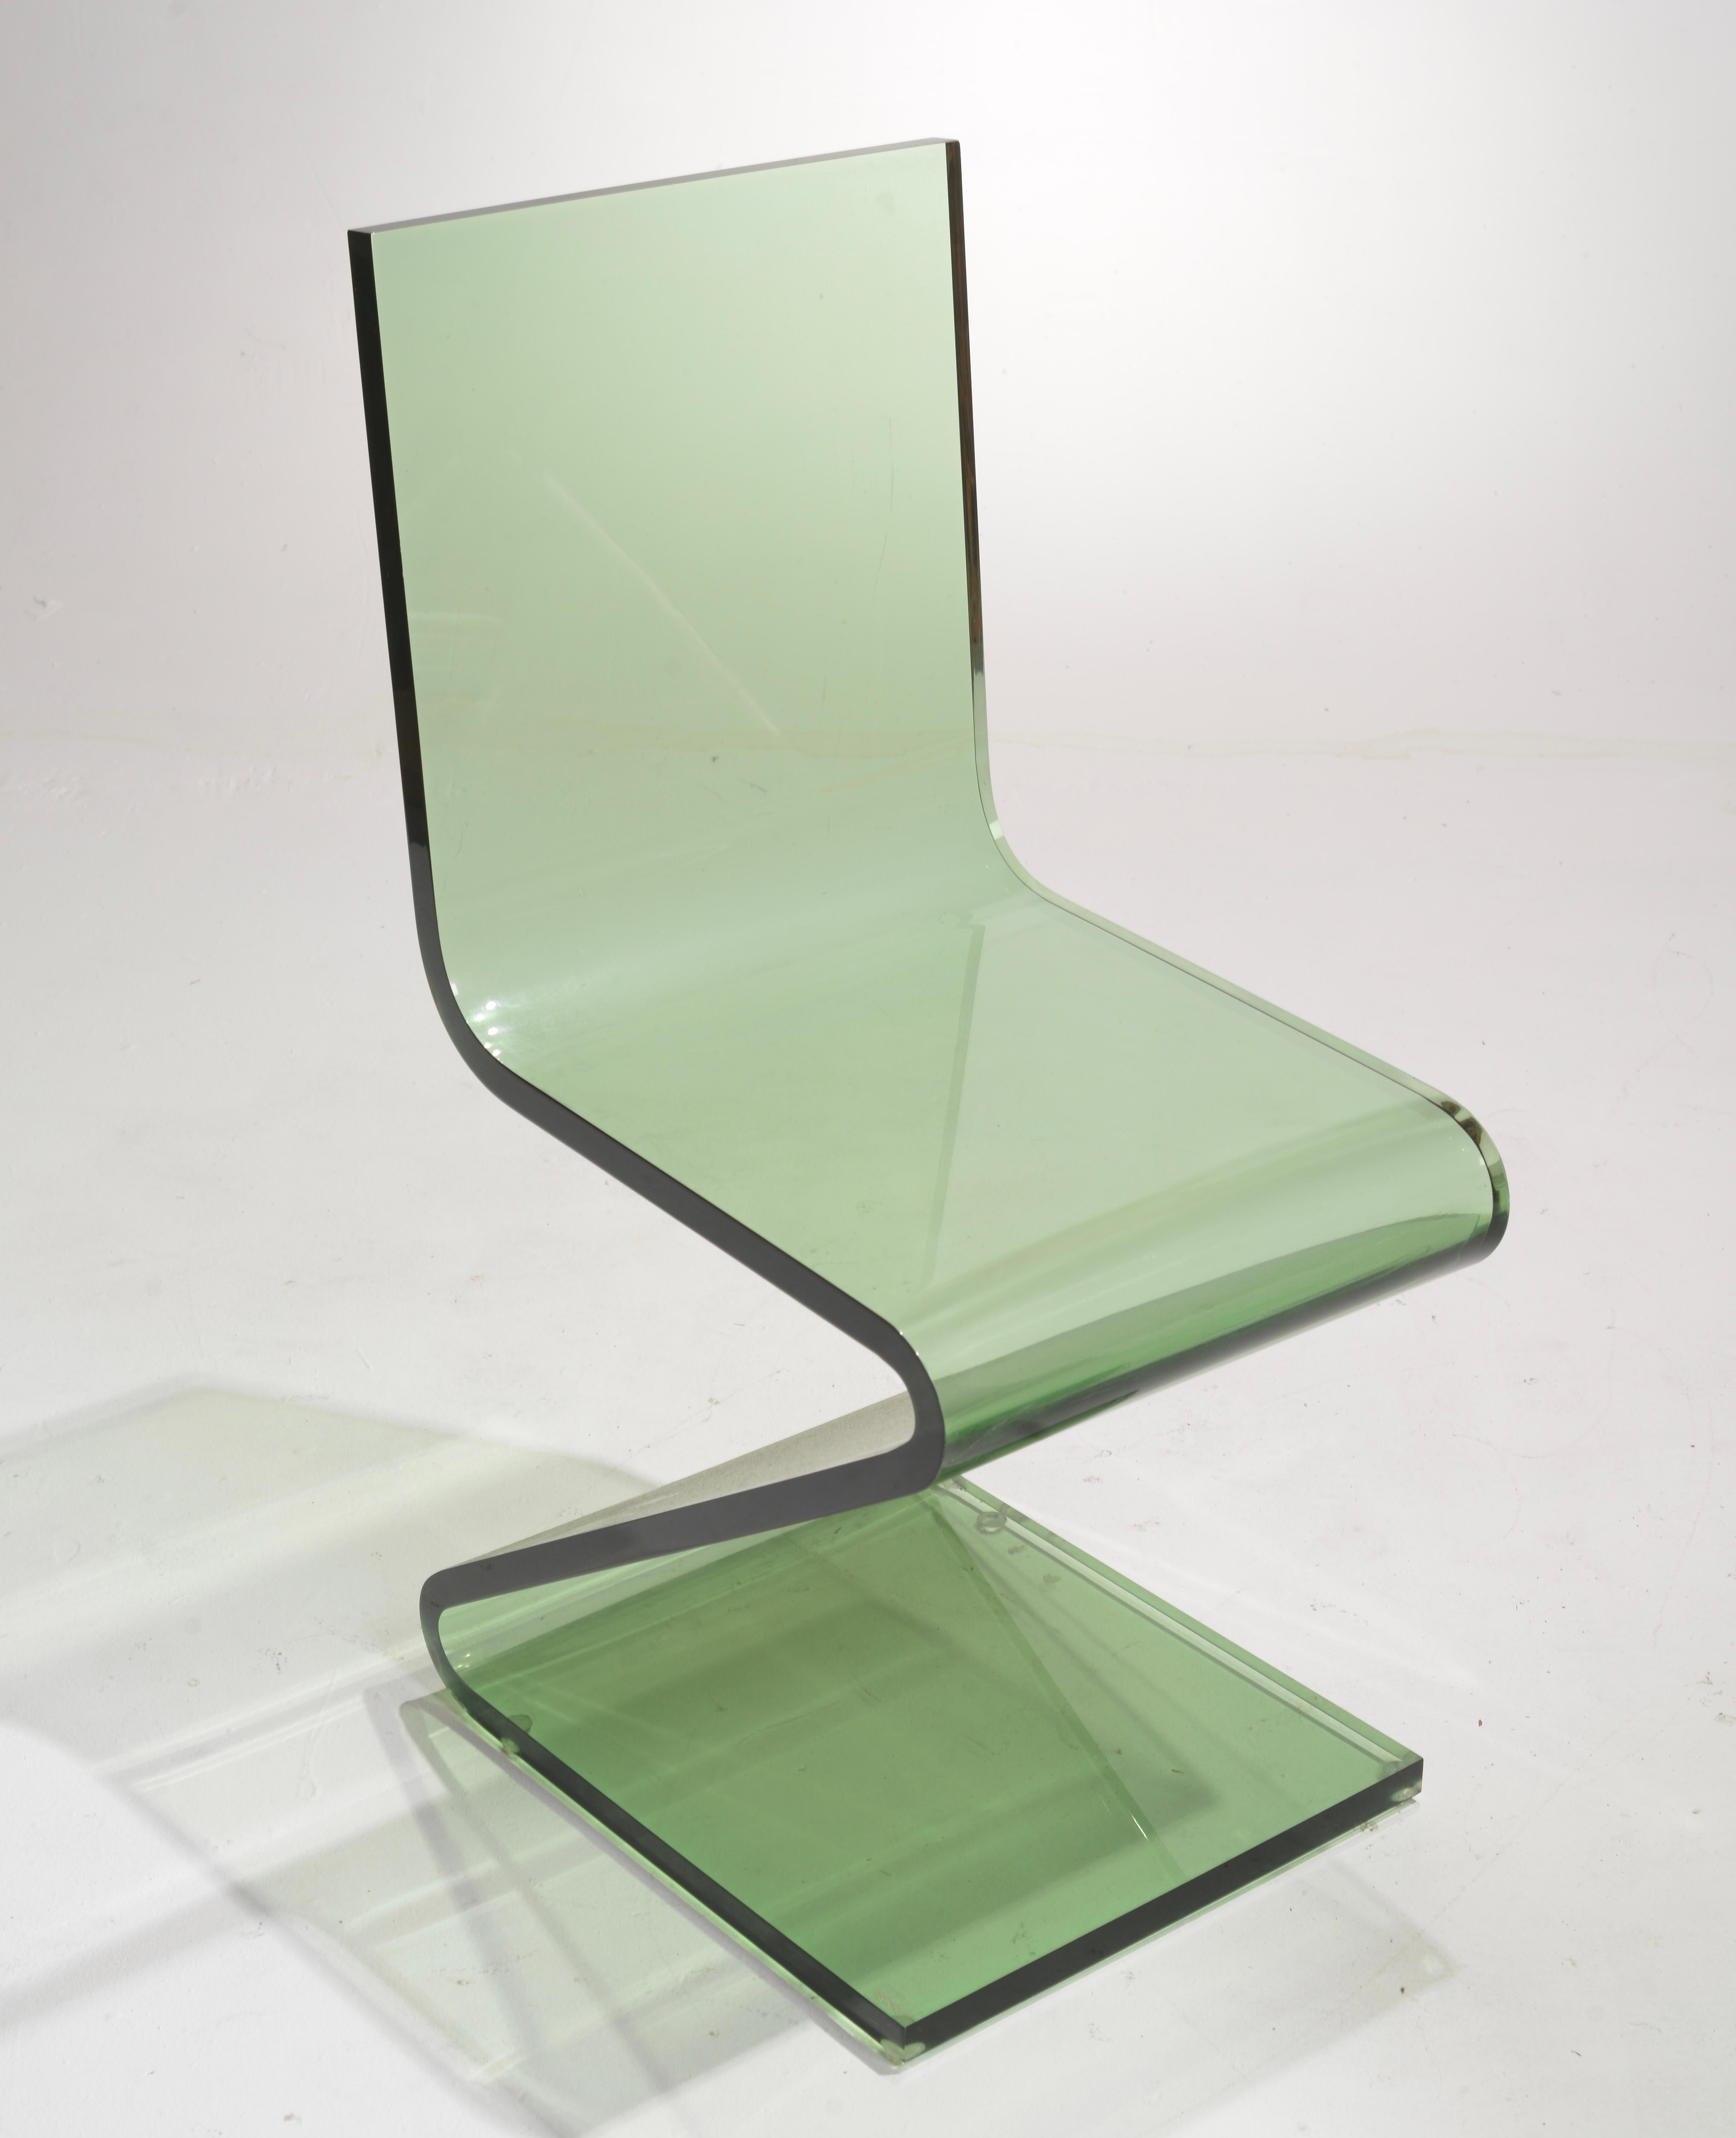 Vintage Lucite Z Table and Z Chairs by Shlomi Haziza for H Studio For Sale 11